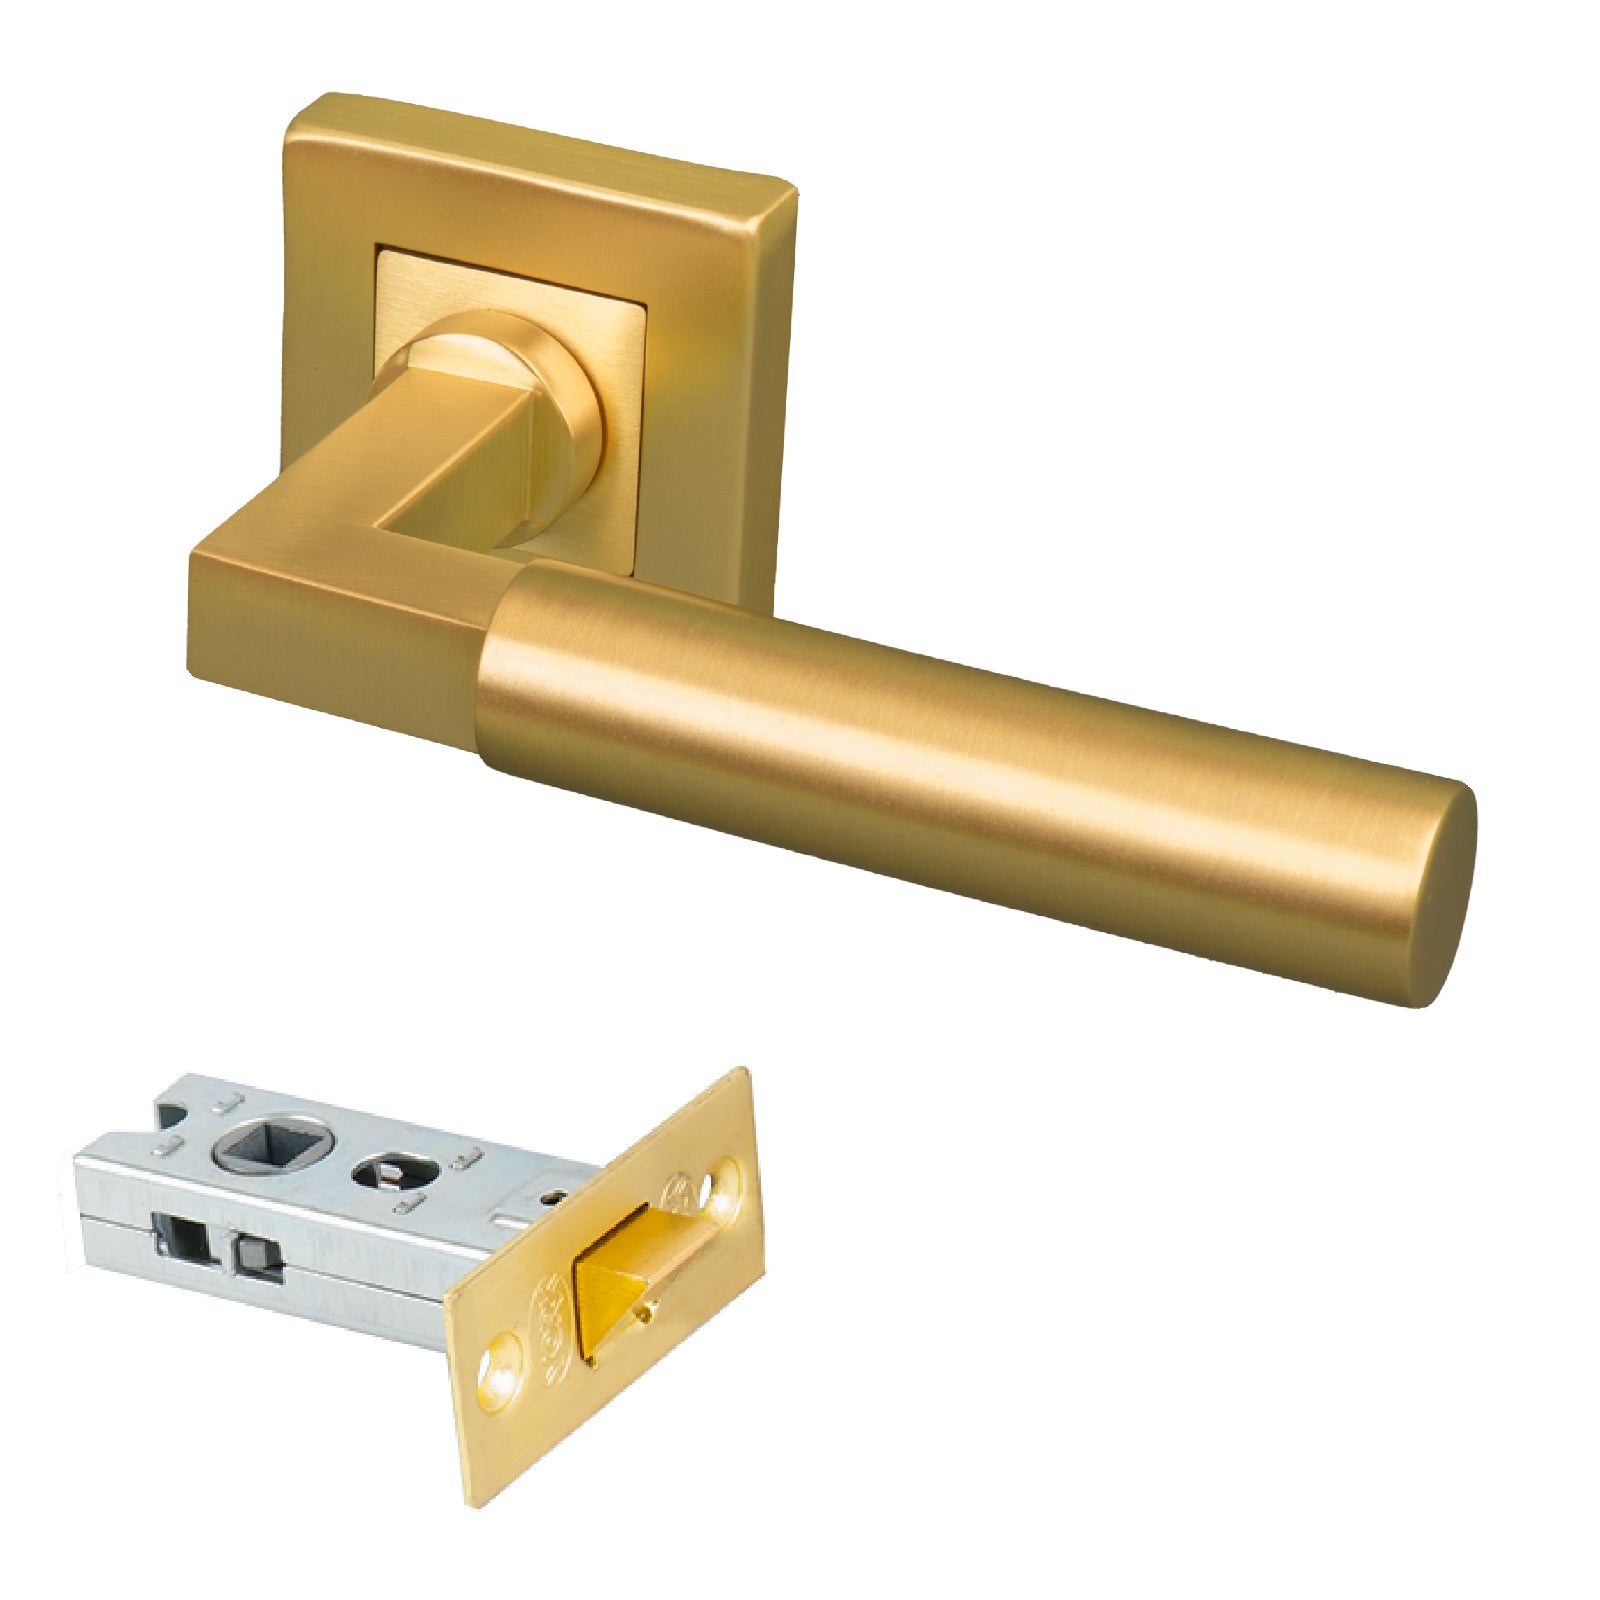 Satin Brass square rose door handles latch set, 2.5 inch latch and handles